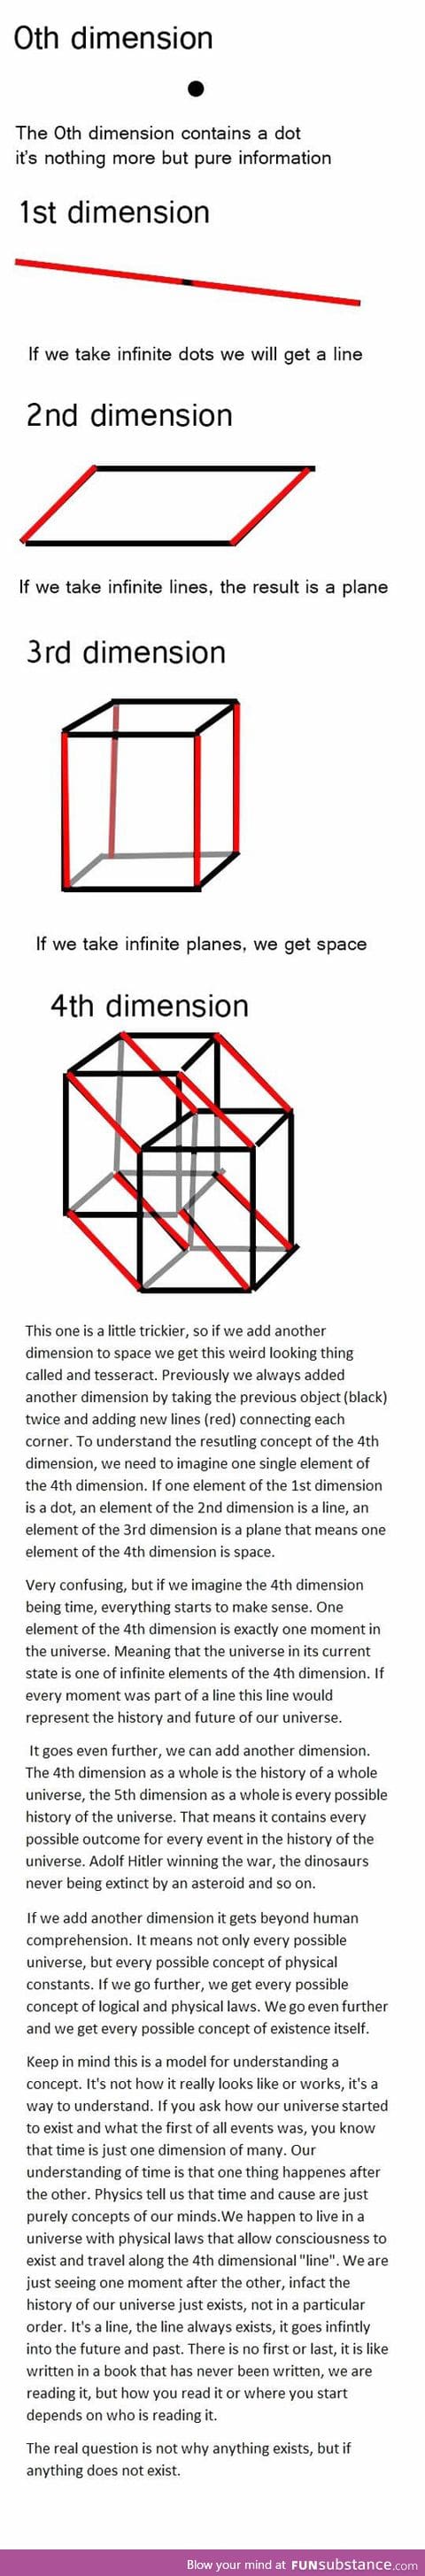 The thing about dimensions